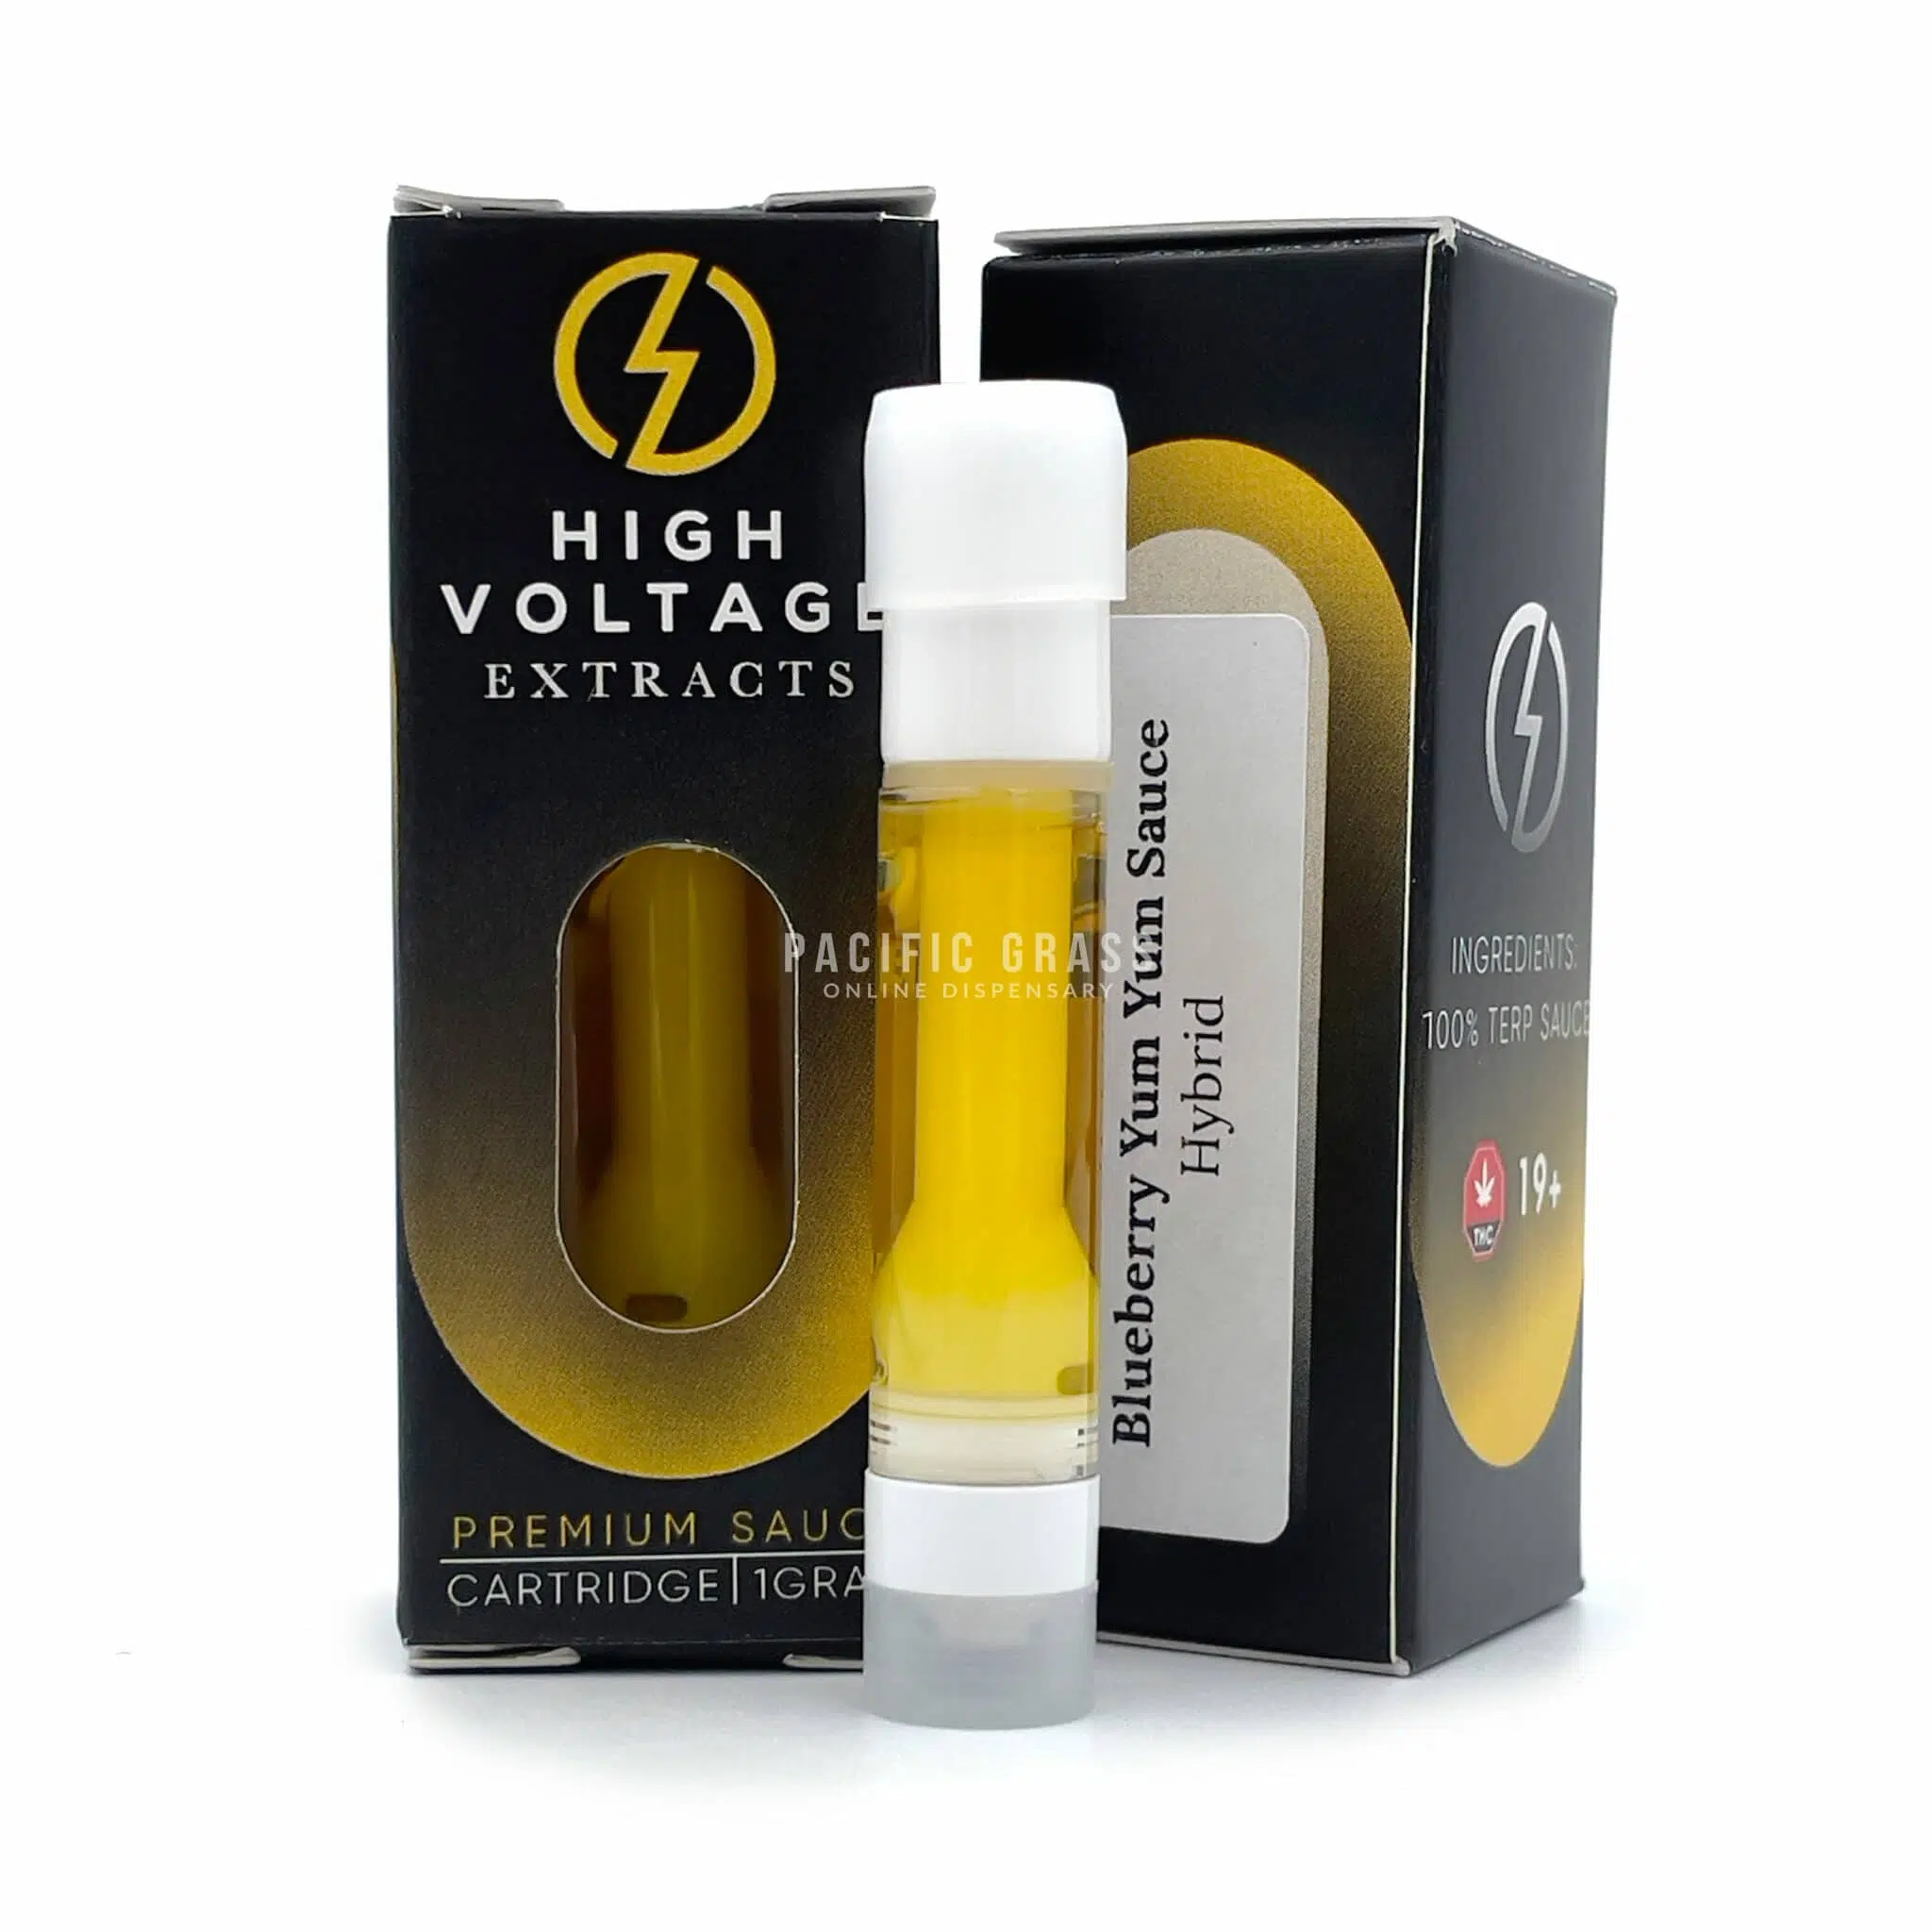 High voltage extracts sauce carts Blueberry Yum Yum